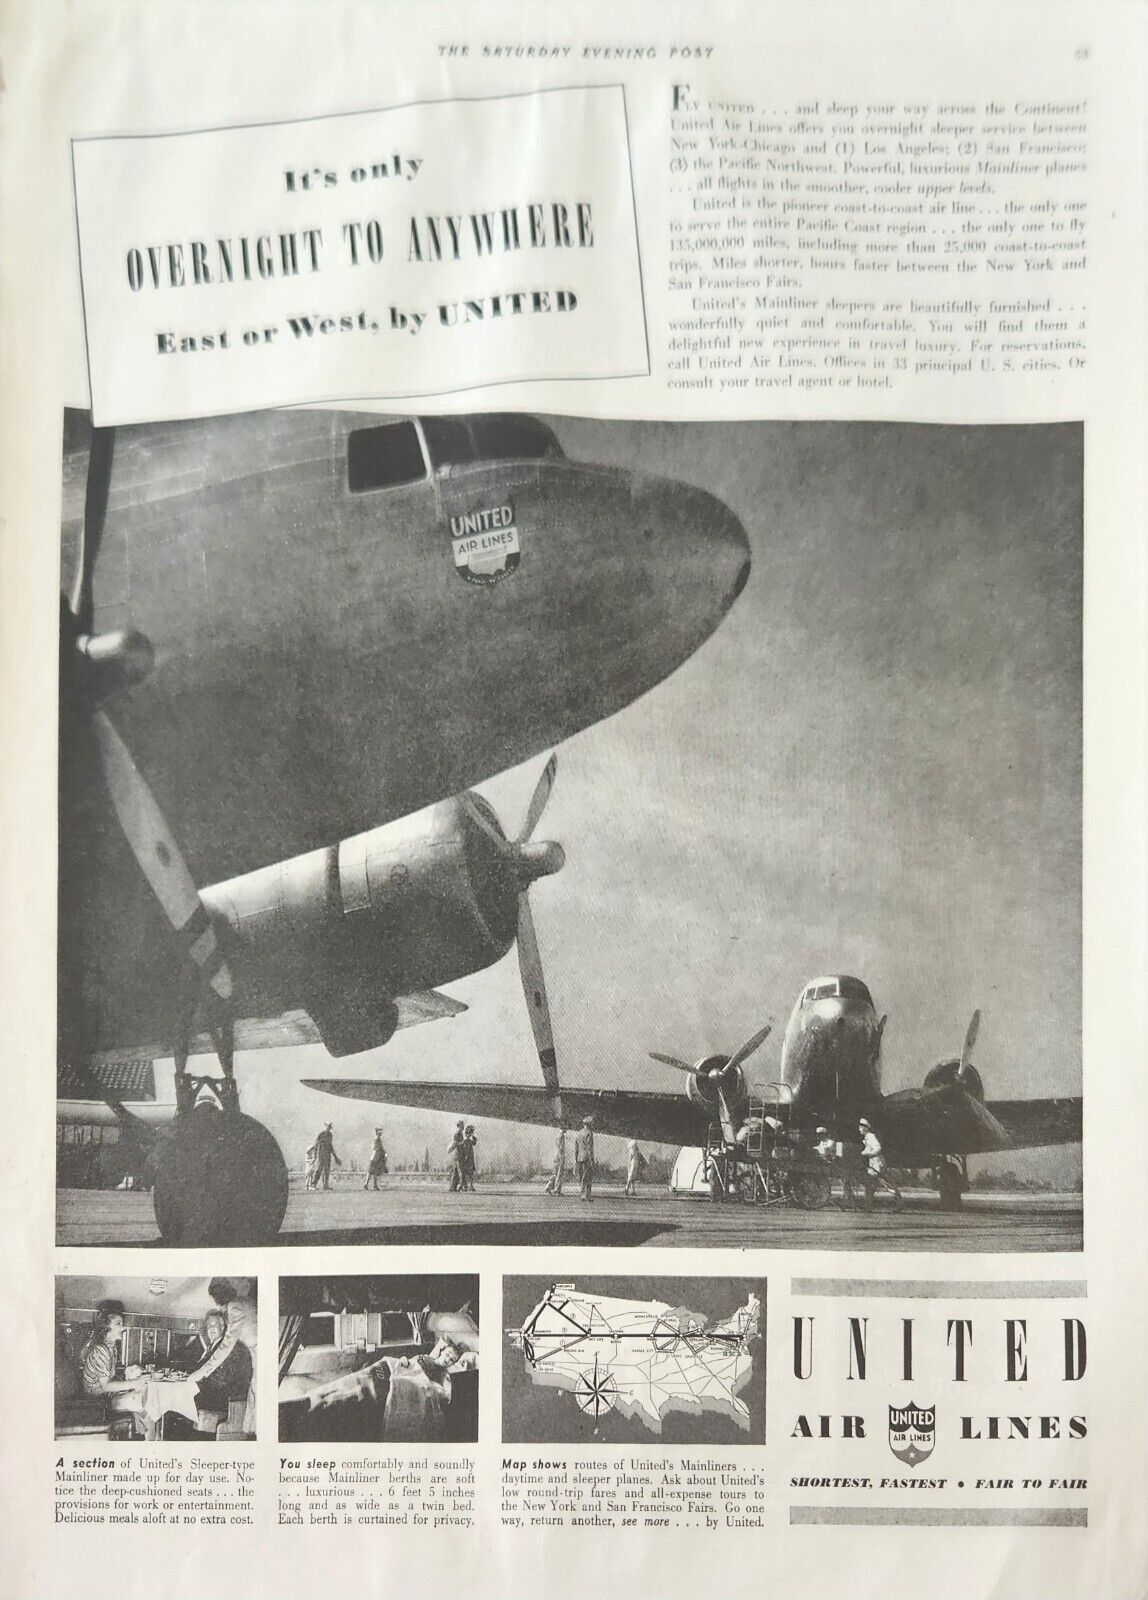 1939 United Air Lines Vintage Ad Its only overnight to anywhere east or west